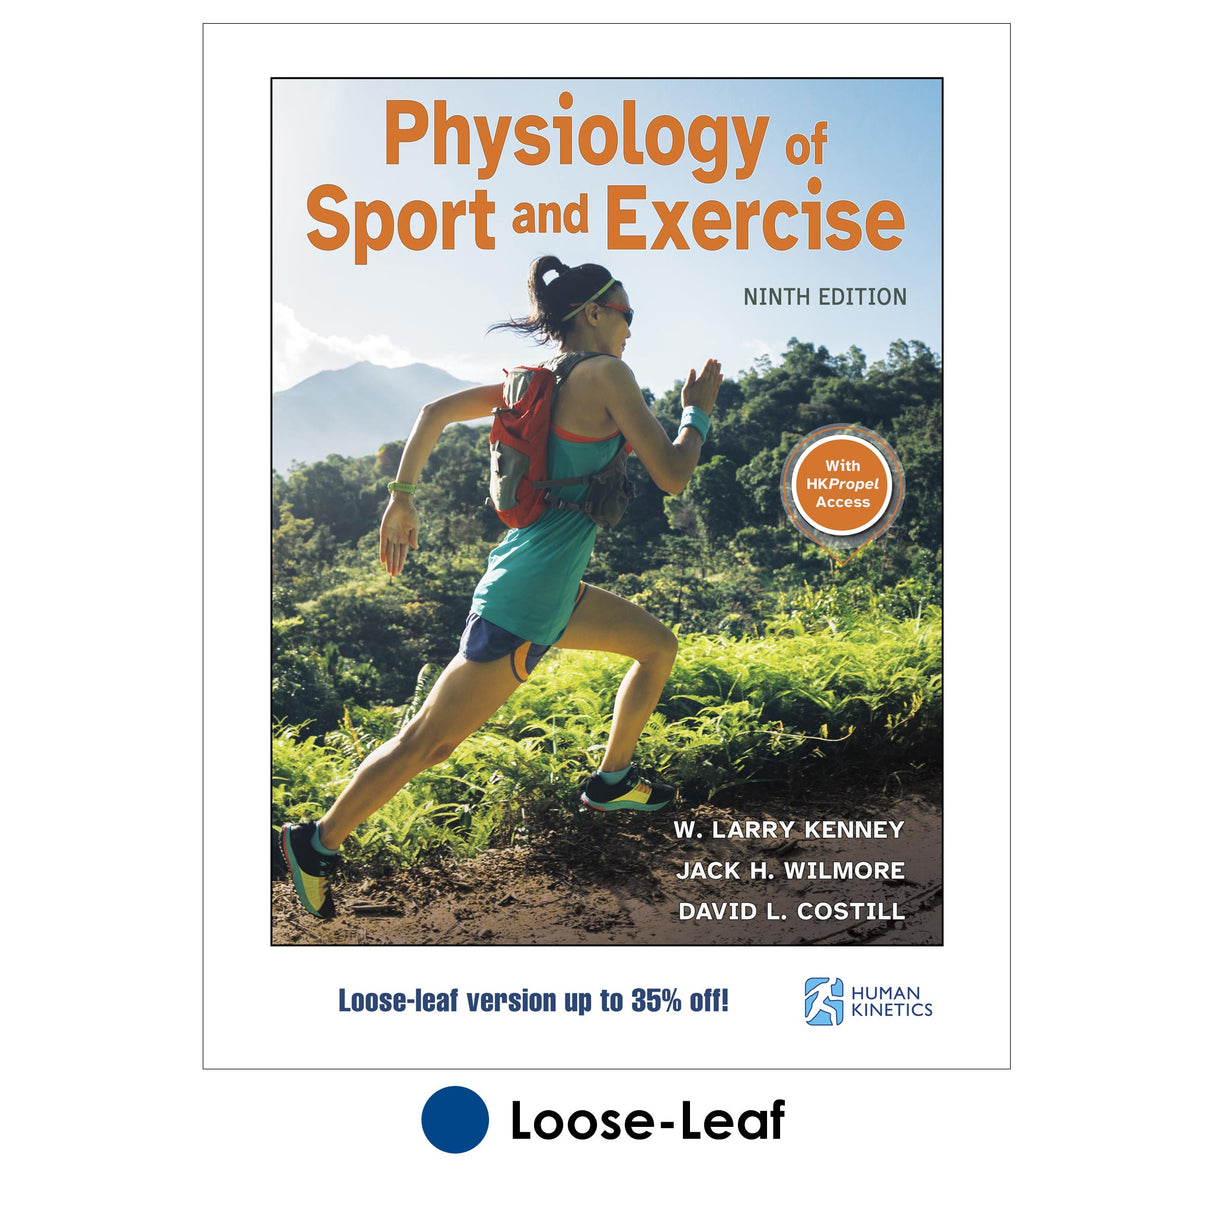 Physiology of Sport and Exercise 9th Edition With HKPropel Access Loose-Leaf Edition